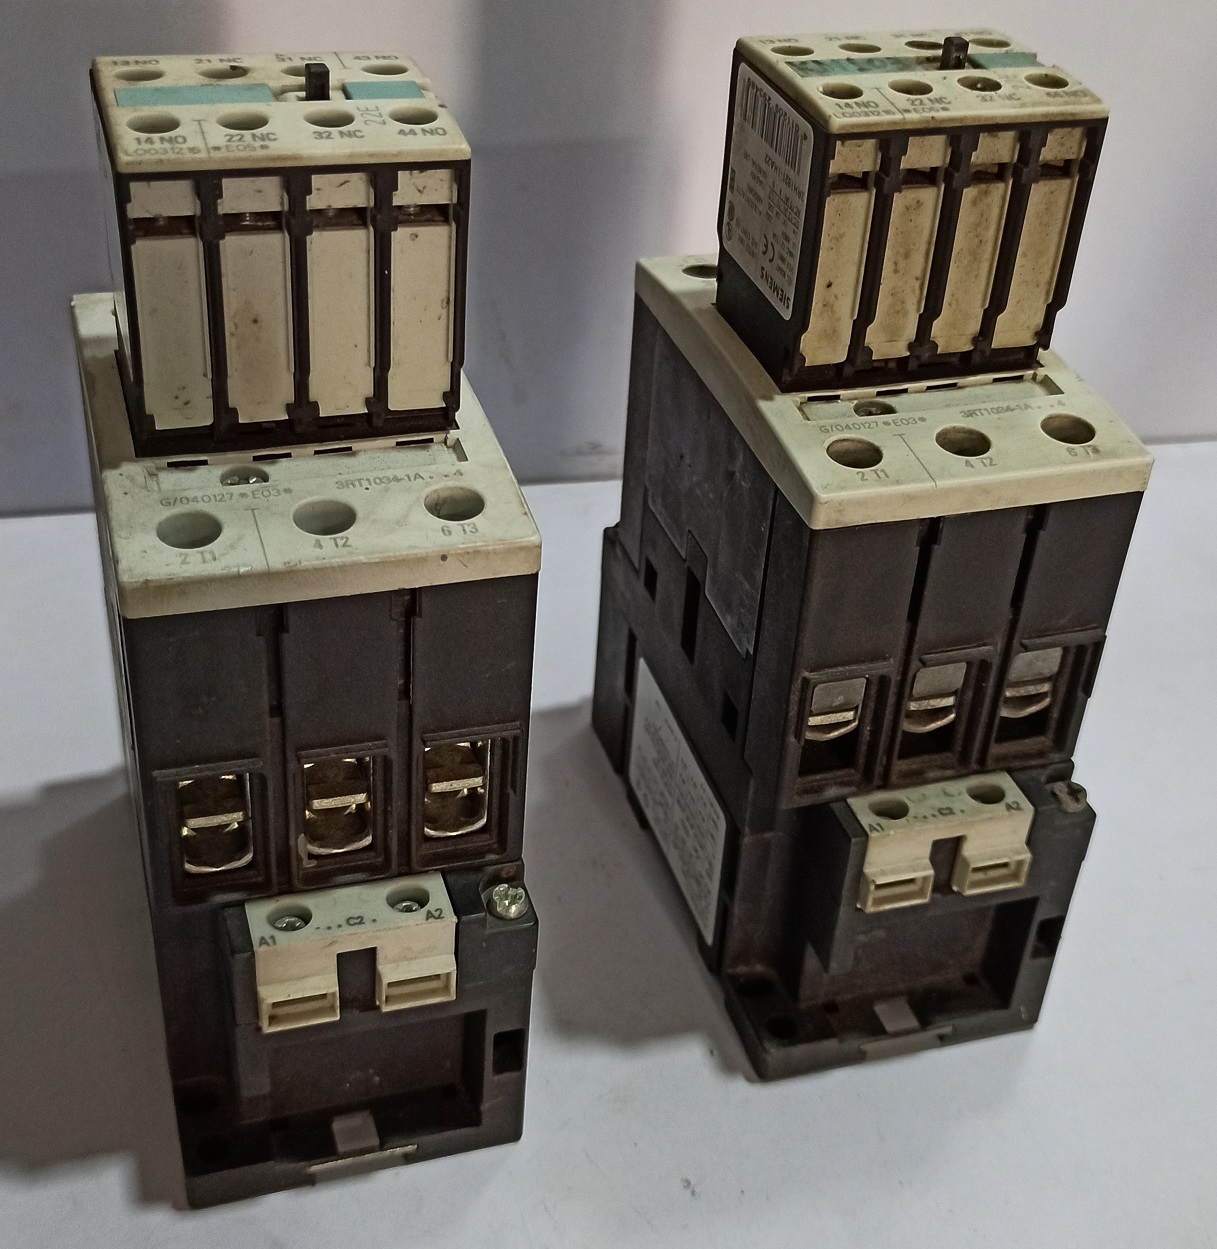 Siemens 3RT1034-1AC24 Contactor With 3RH1921-1HA22 Auxillary - 2 pc lot